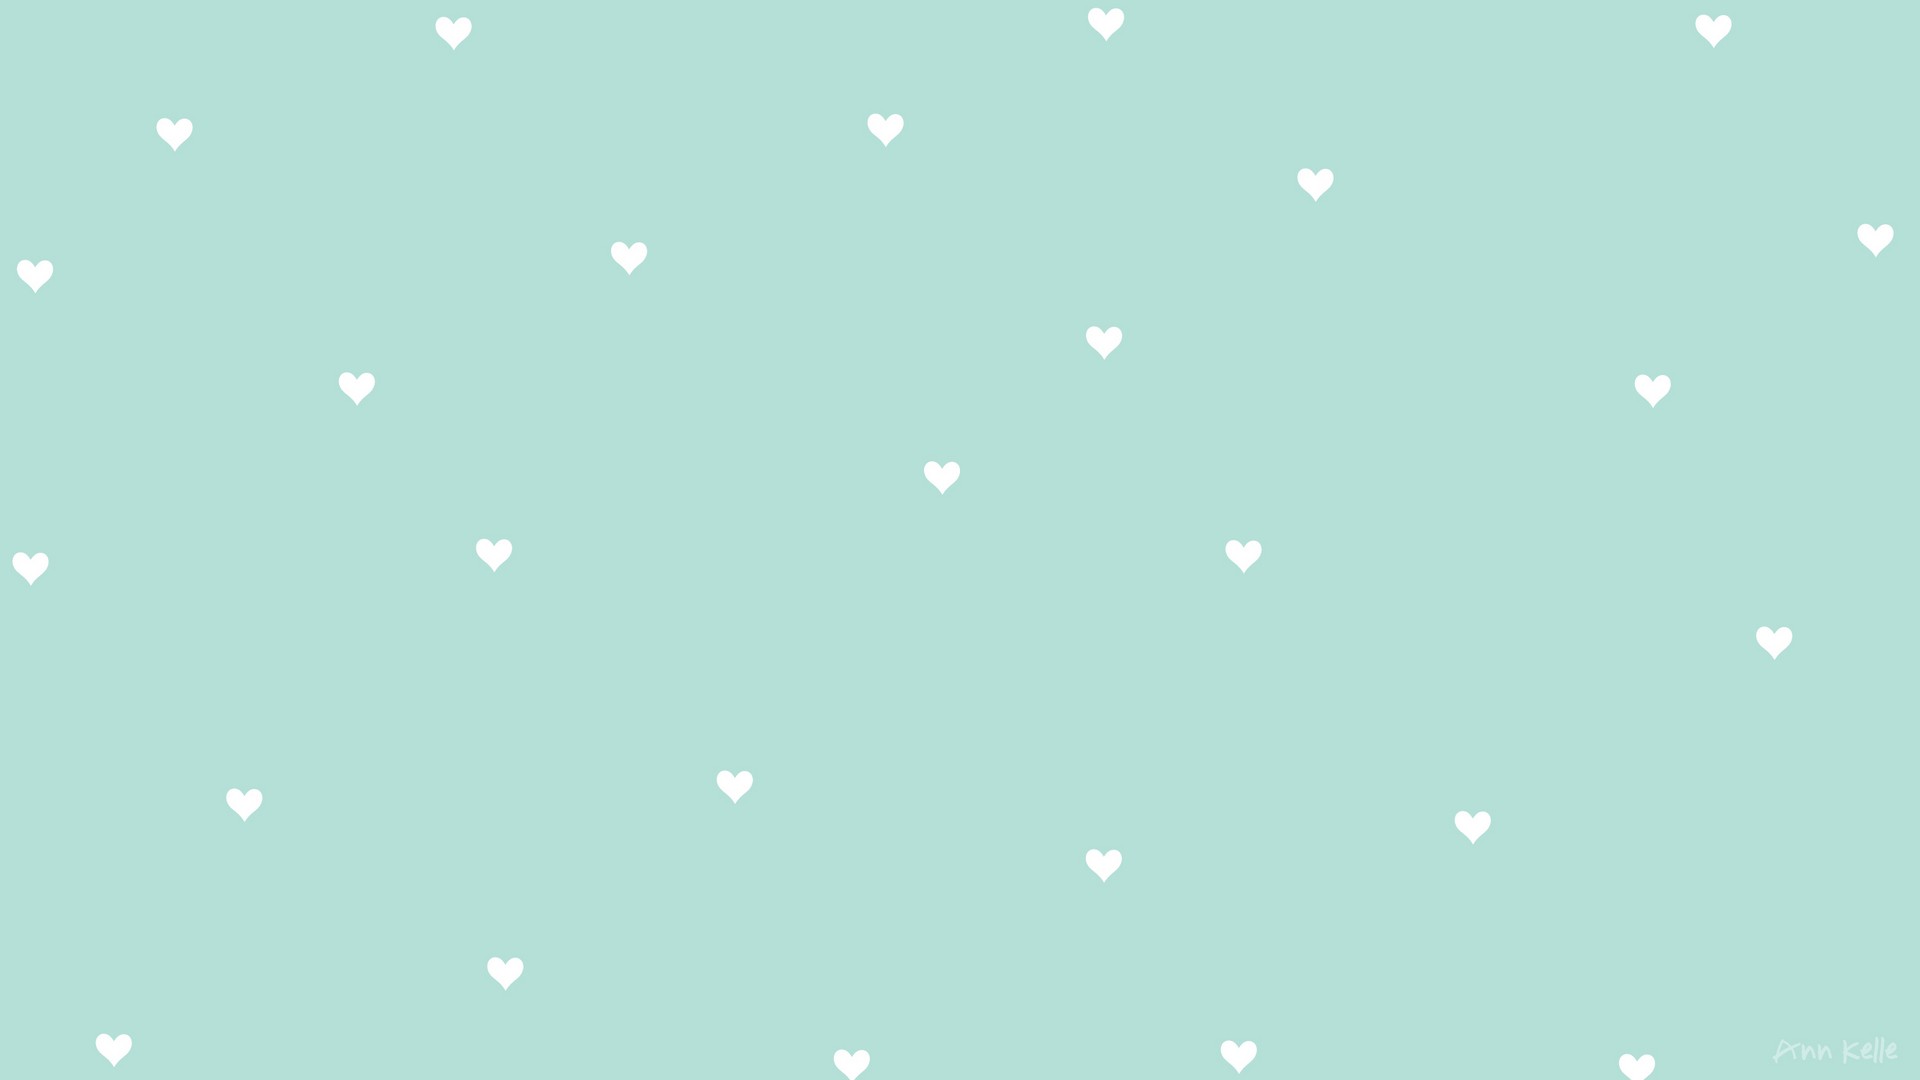 Mint Green HD Backgrounds with image resolution 1920x1080 pixel. You can make this wallpaper for your Desktop Computer Backgrounds, Mac Wallpapers, Android Lock screen or iPhone Screensavers